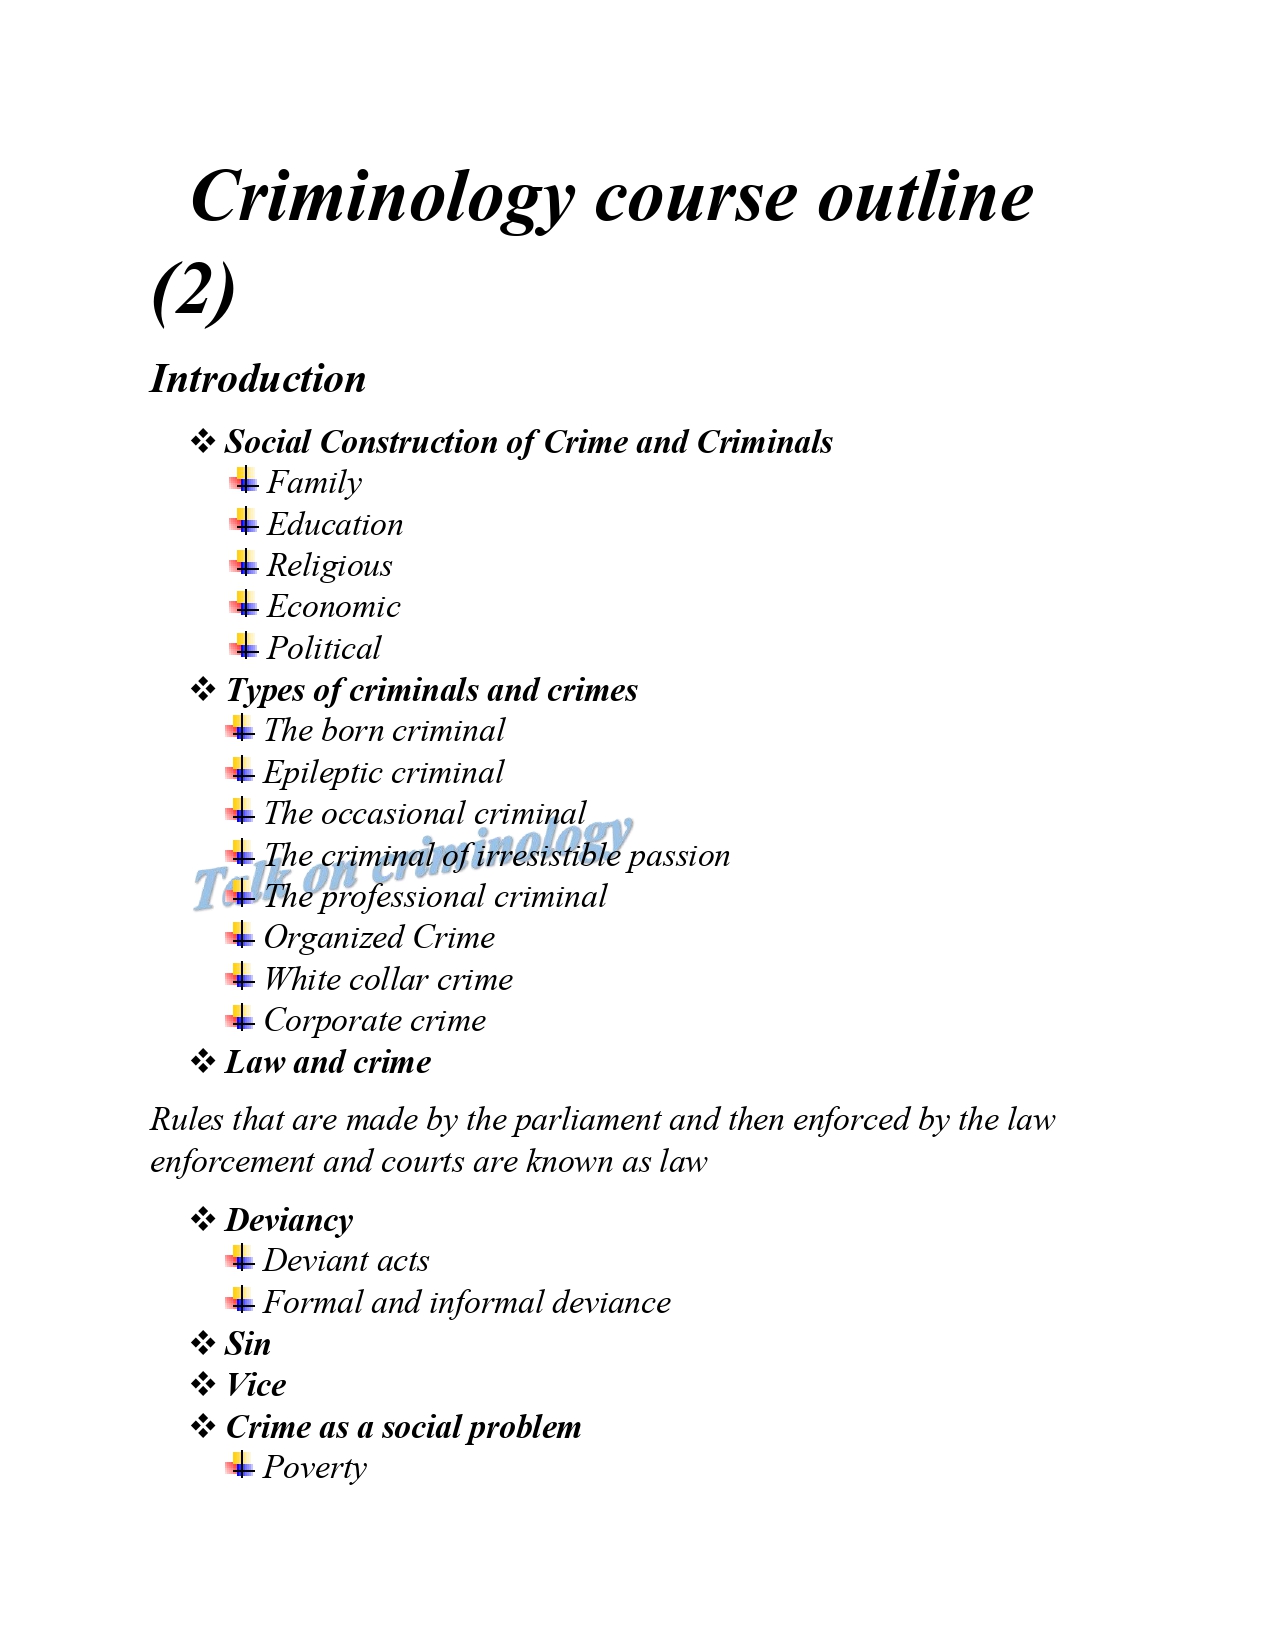 example title of thesis in criminology